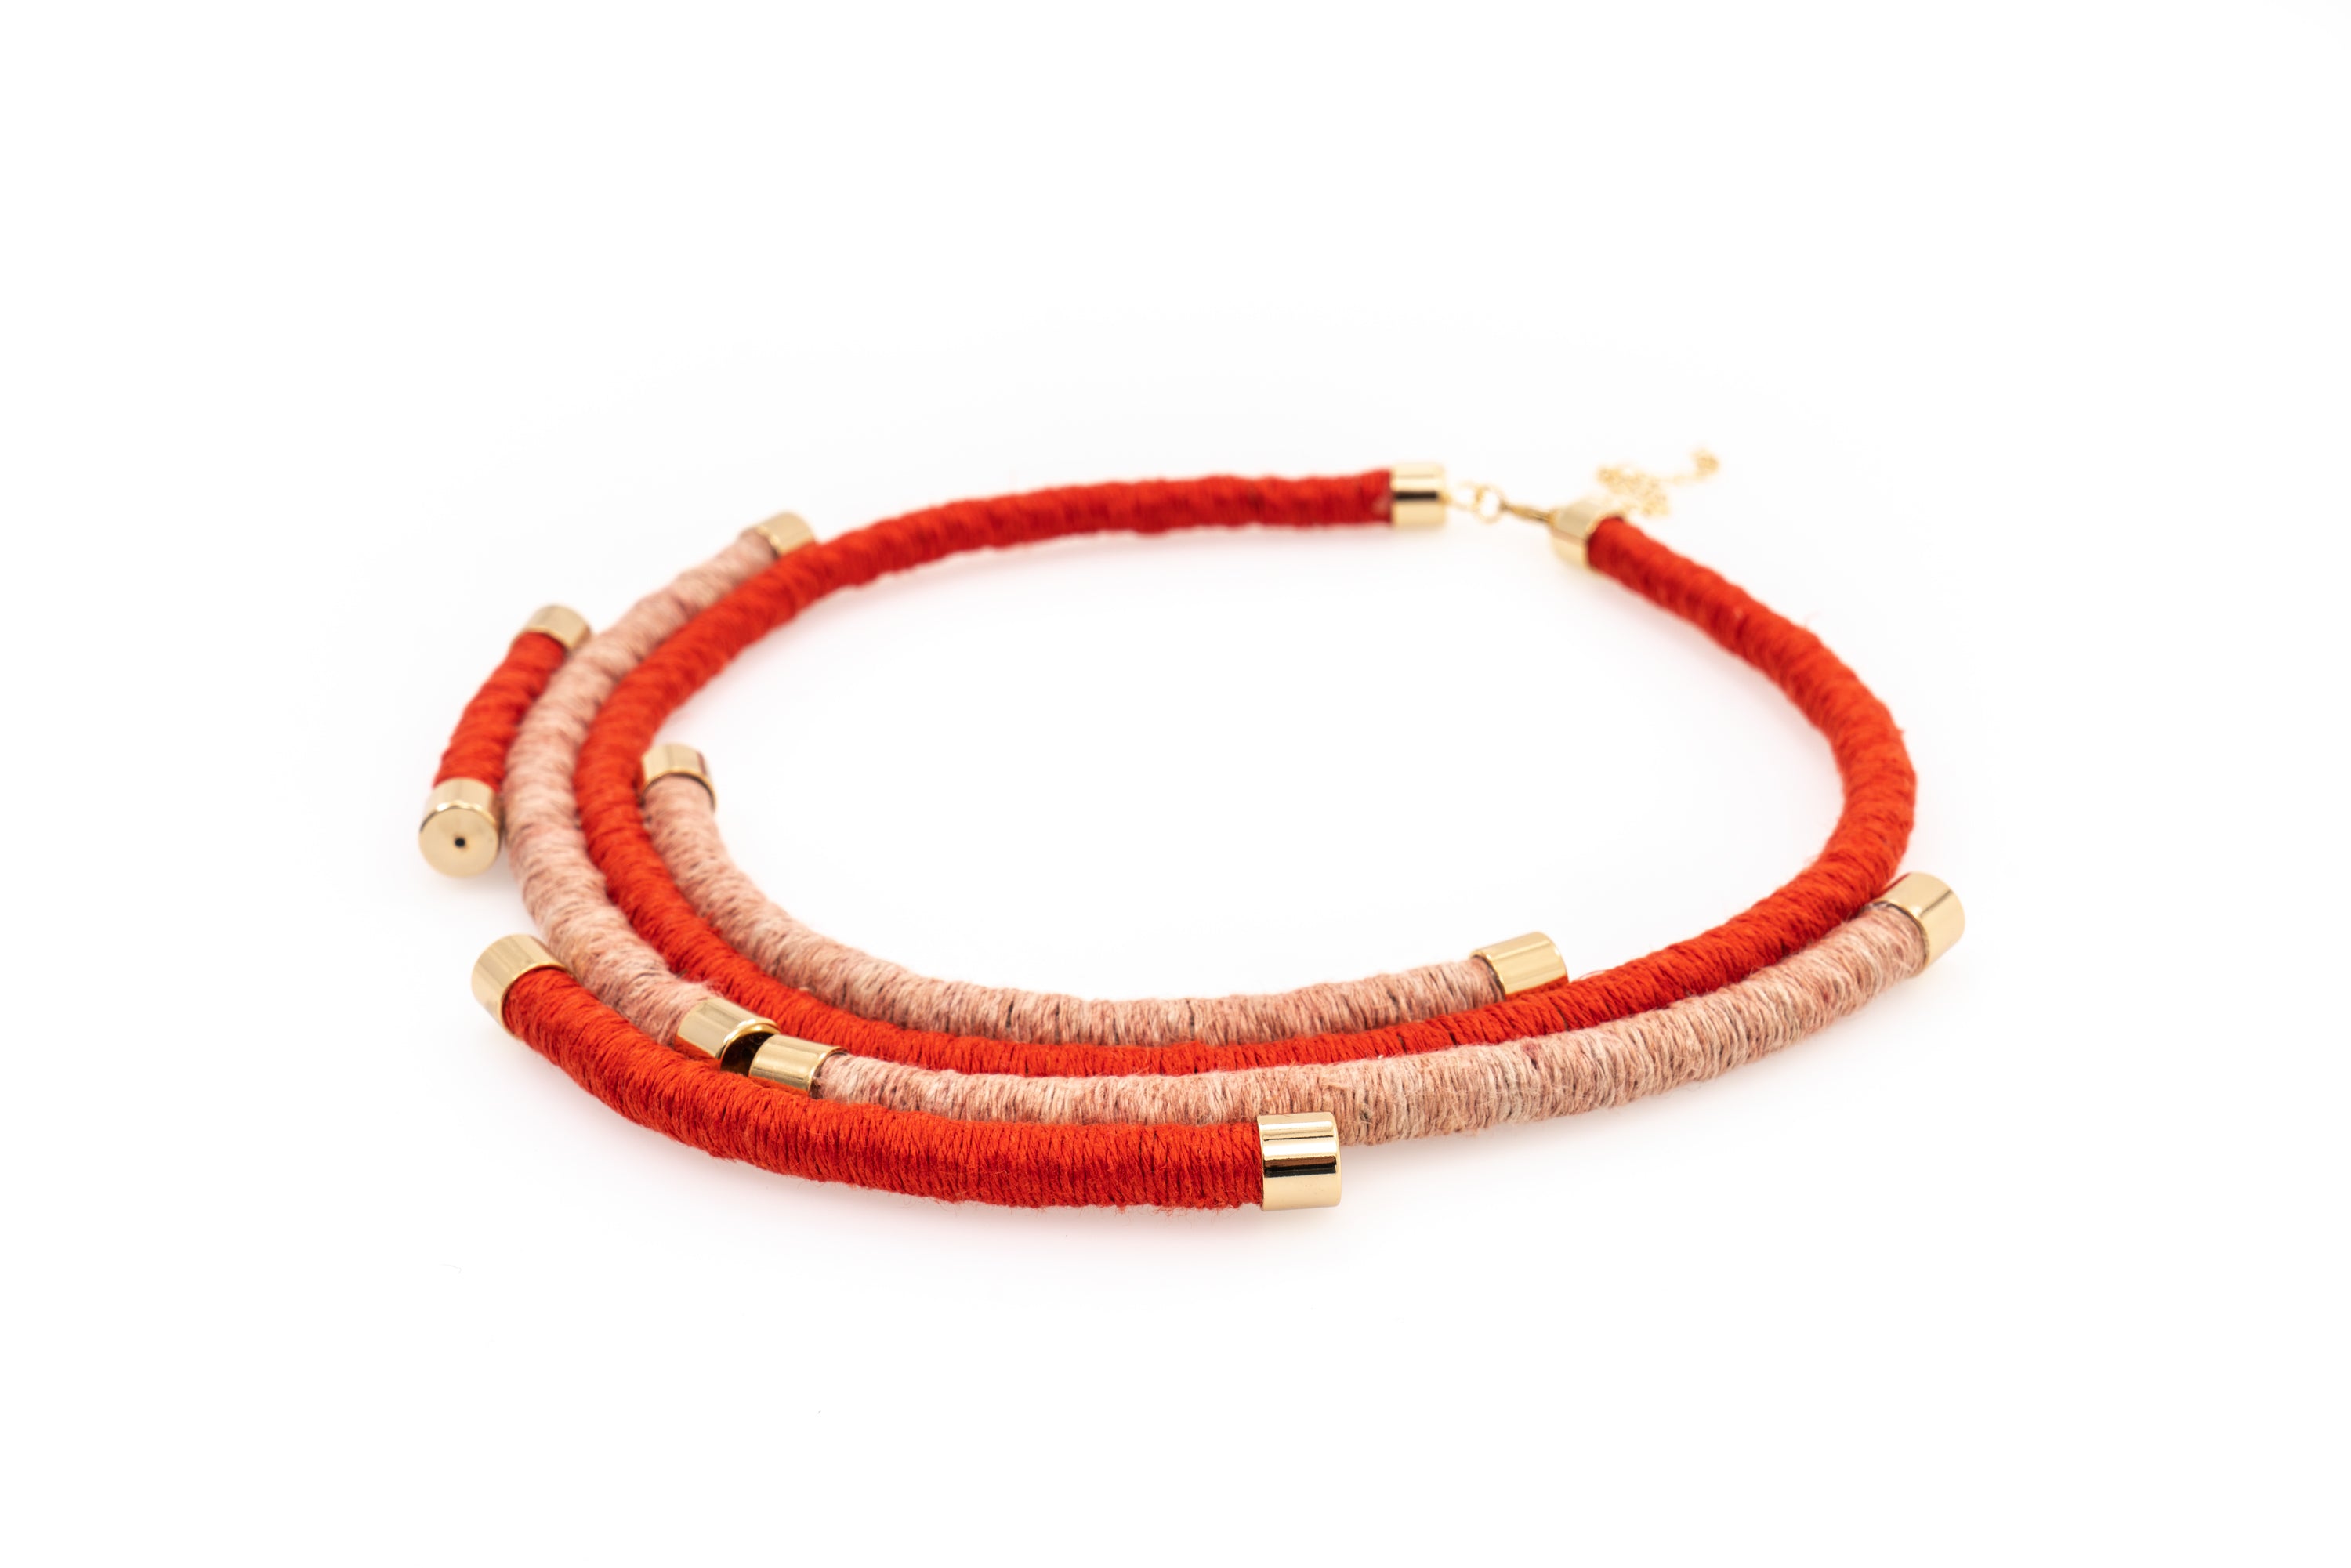 Fiber Art Jewelry Hemp Wrapped Choker Necklace in Pink and Coral